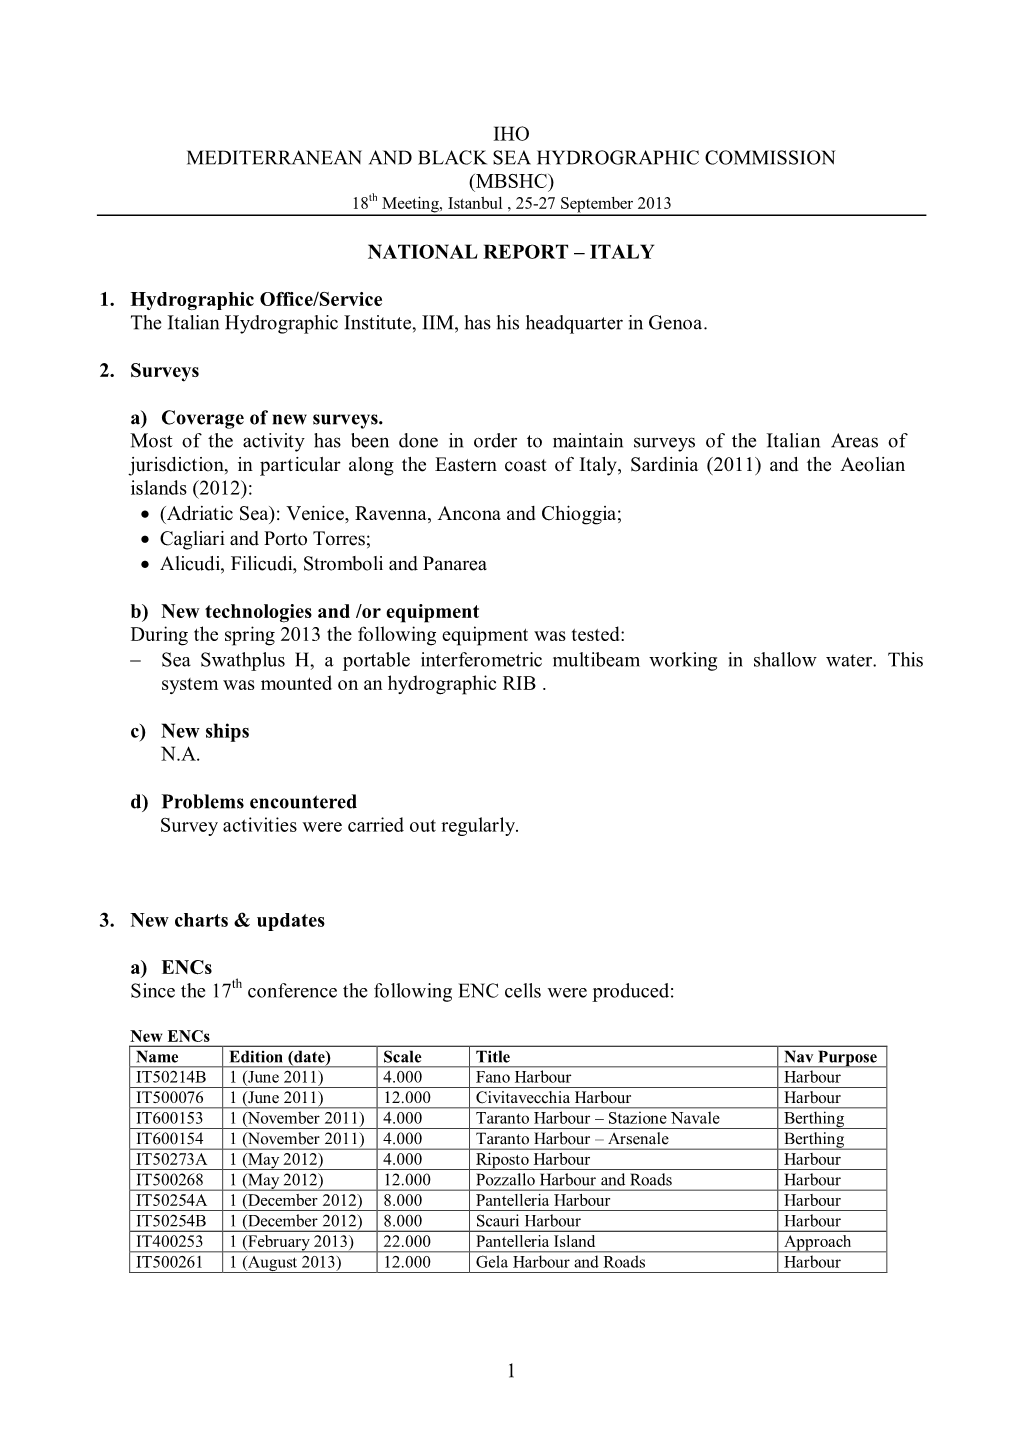 NATIONAL REPORT – ITALY 1. Hydrographic Office/Service the I